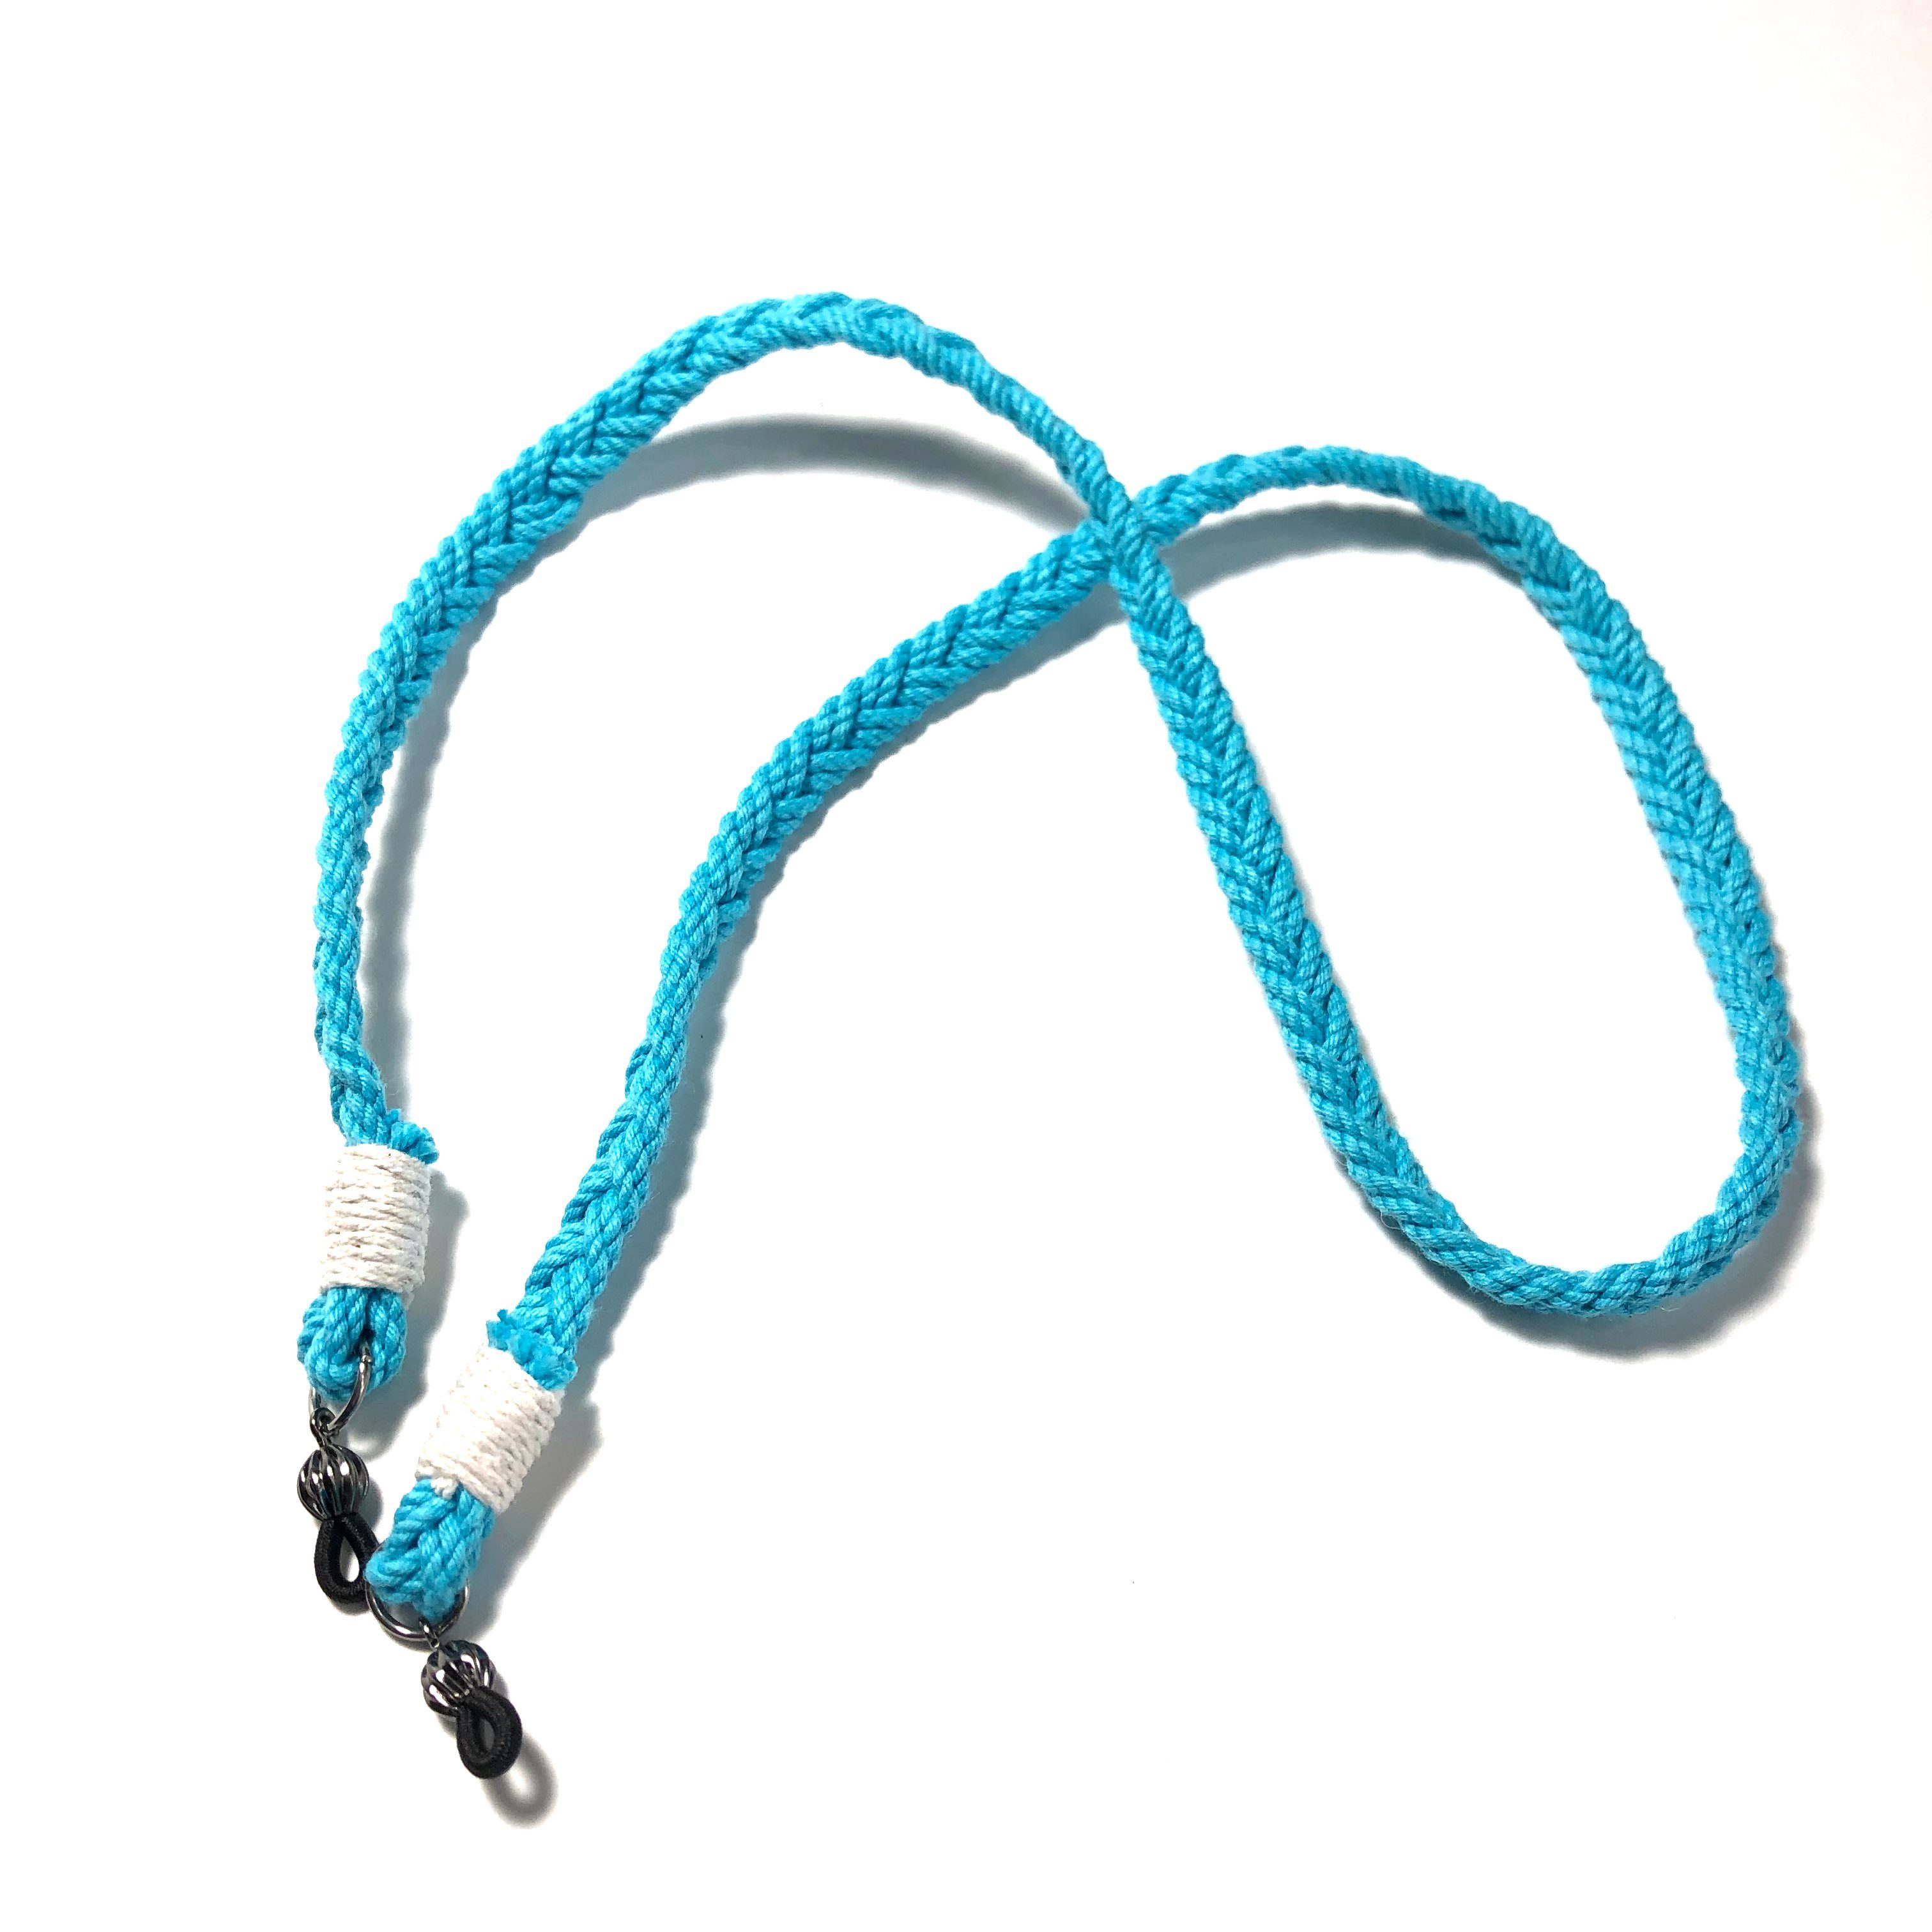 Nautical Nautical Woven Eyeglass Lanyard - 8 Colors Made in the USA by hand  in Mystic, Connecticut $ 22.50